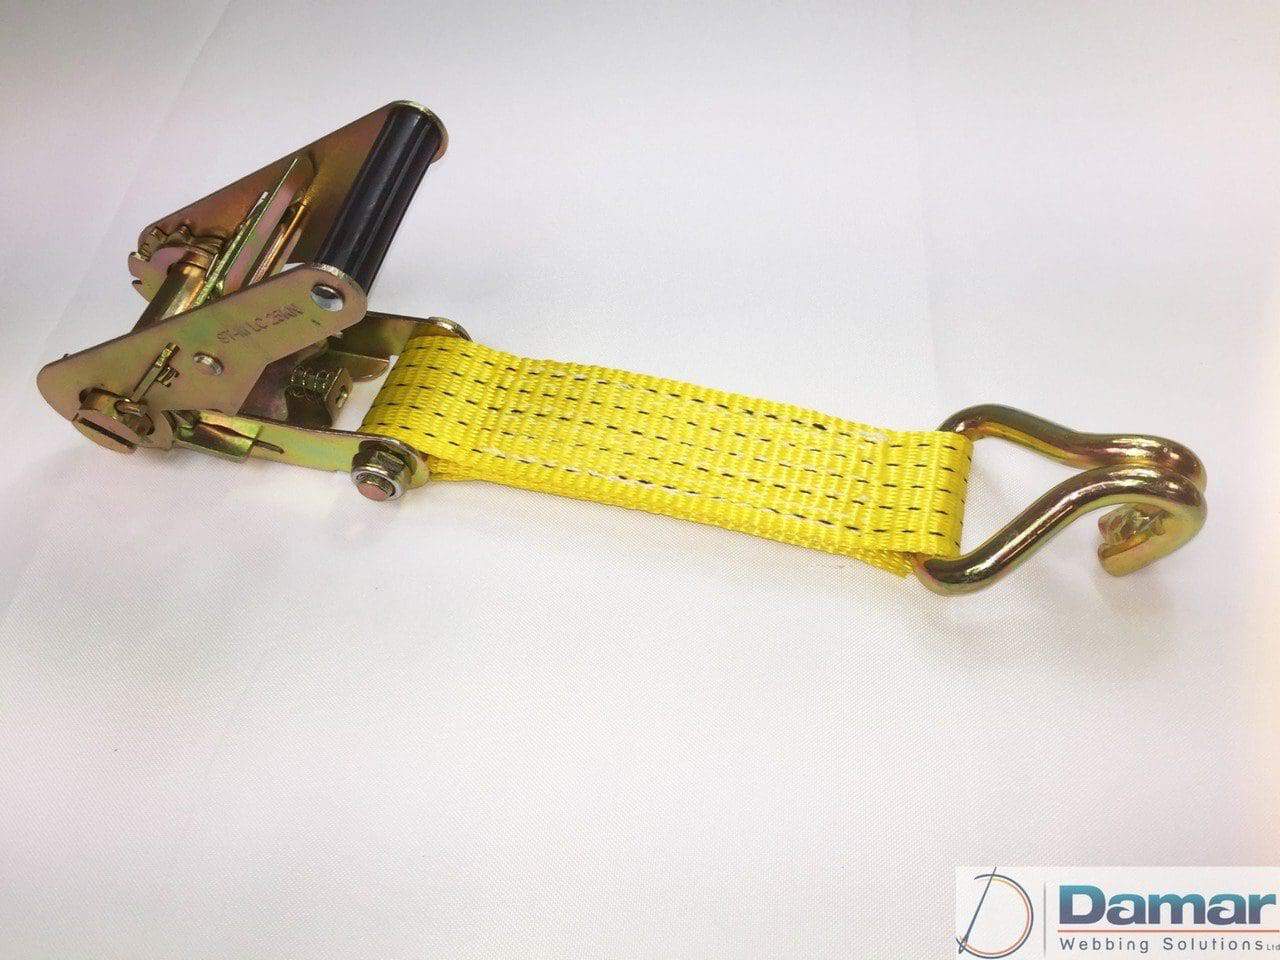 Recovery ratchet transporter safety strap with snap hook and ring - Damar  Webbing Solutions Ltd